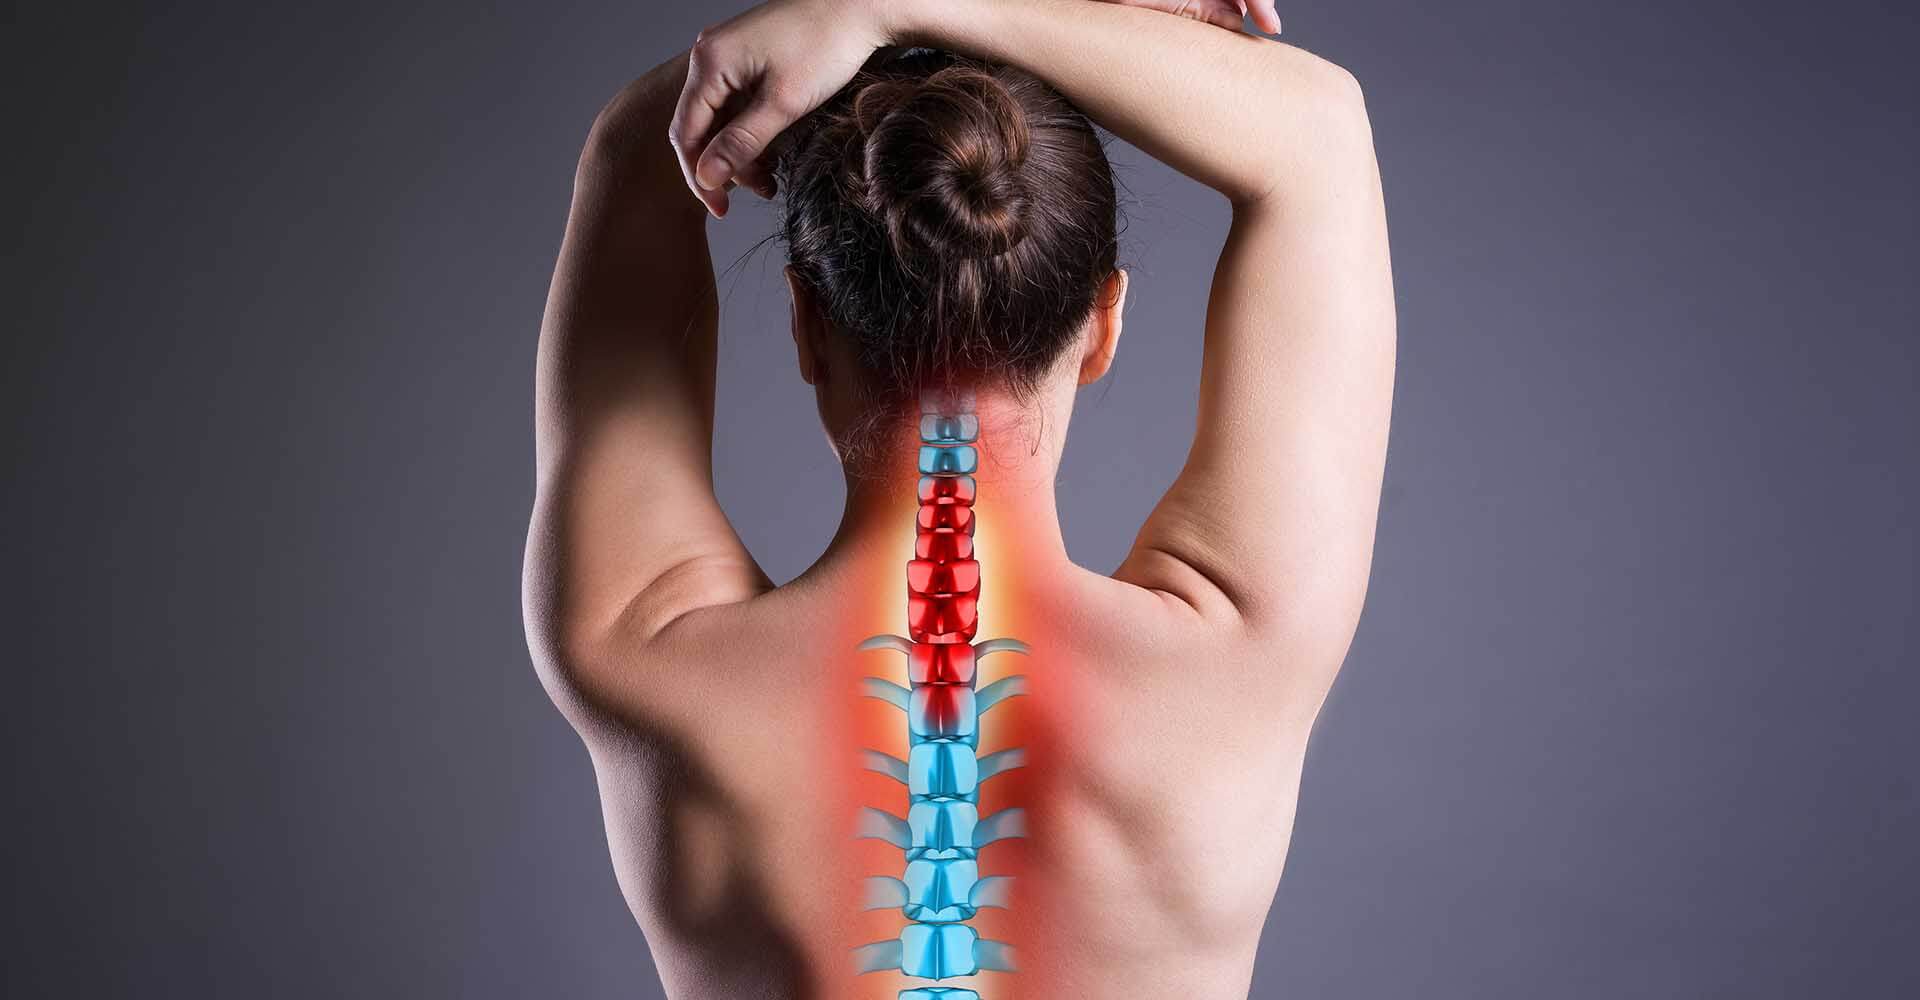 What Causes Lower Back Pain in Females?